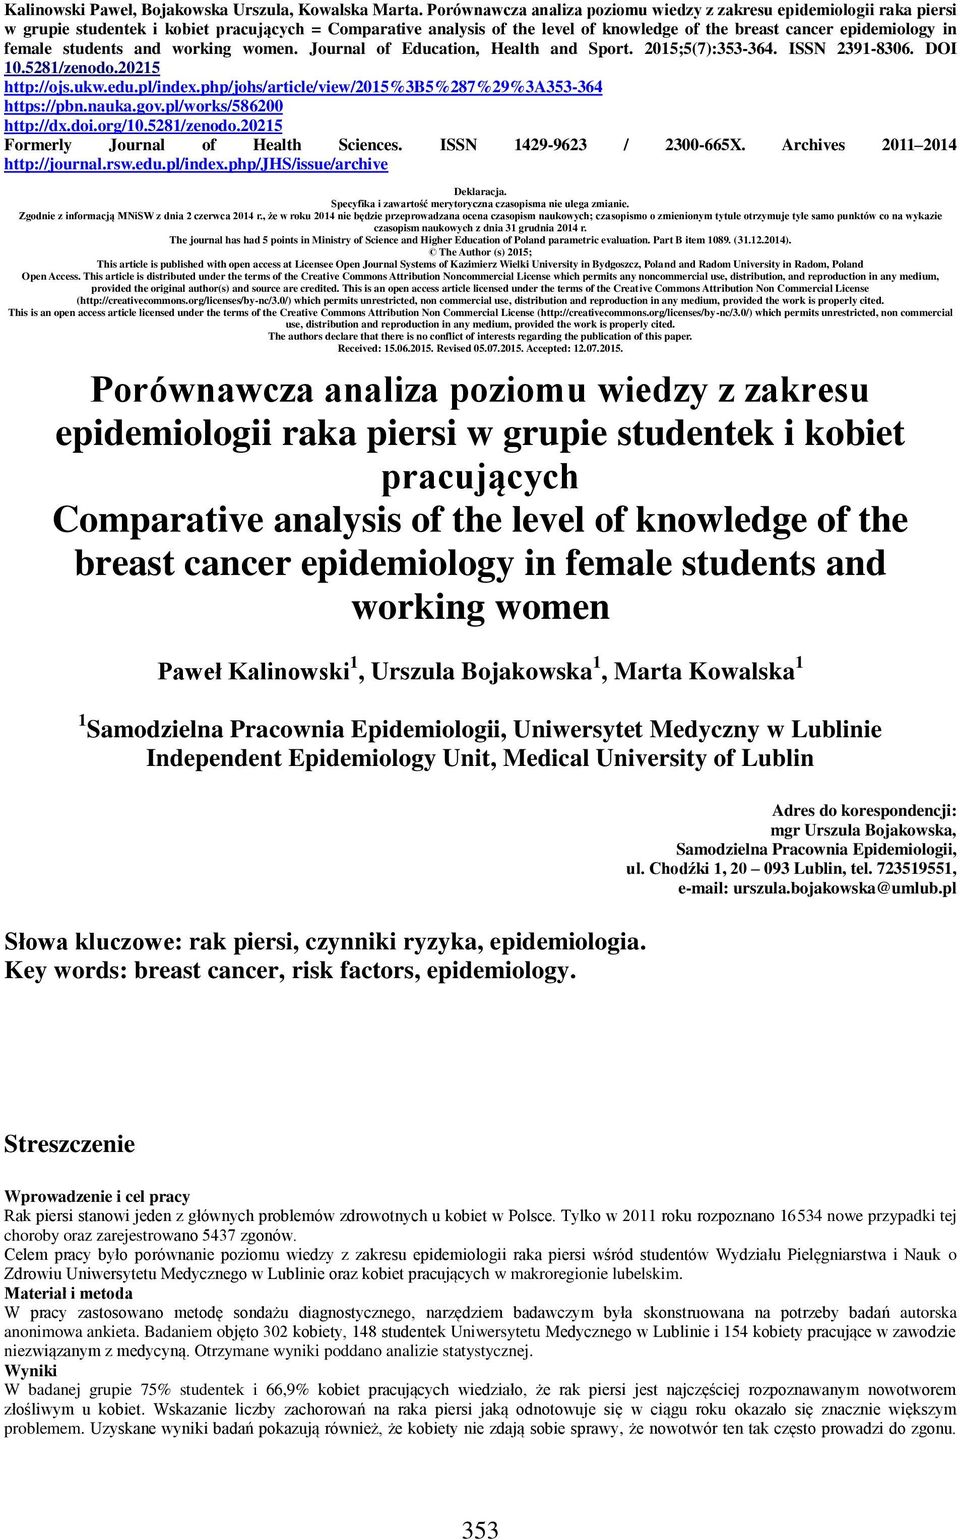 female students and working women. Journal of Education, Health and Sport. 2015;5(7):353-364. ISSN 2391-8306. DOI 10.5281/zenodo.20215 http://ojs.ukw.edu.pl/index.